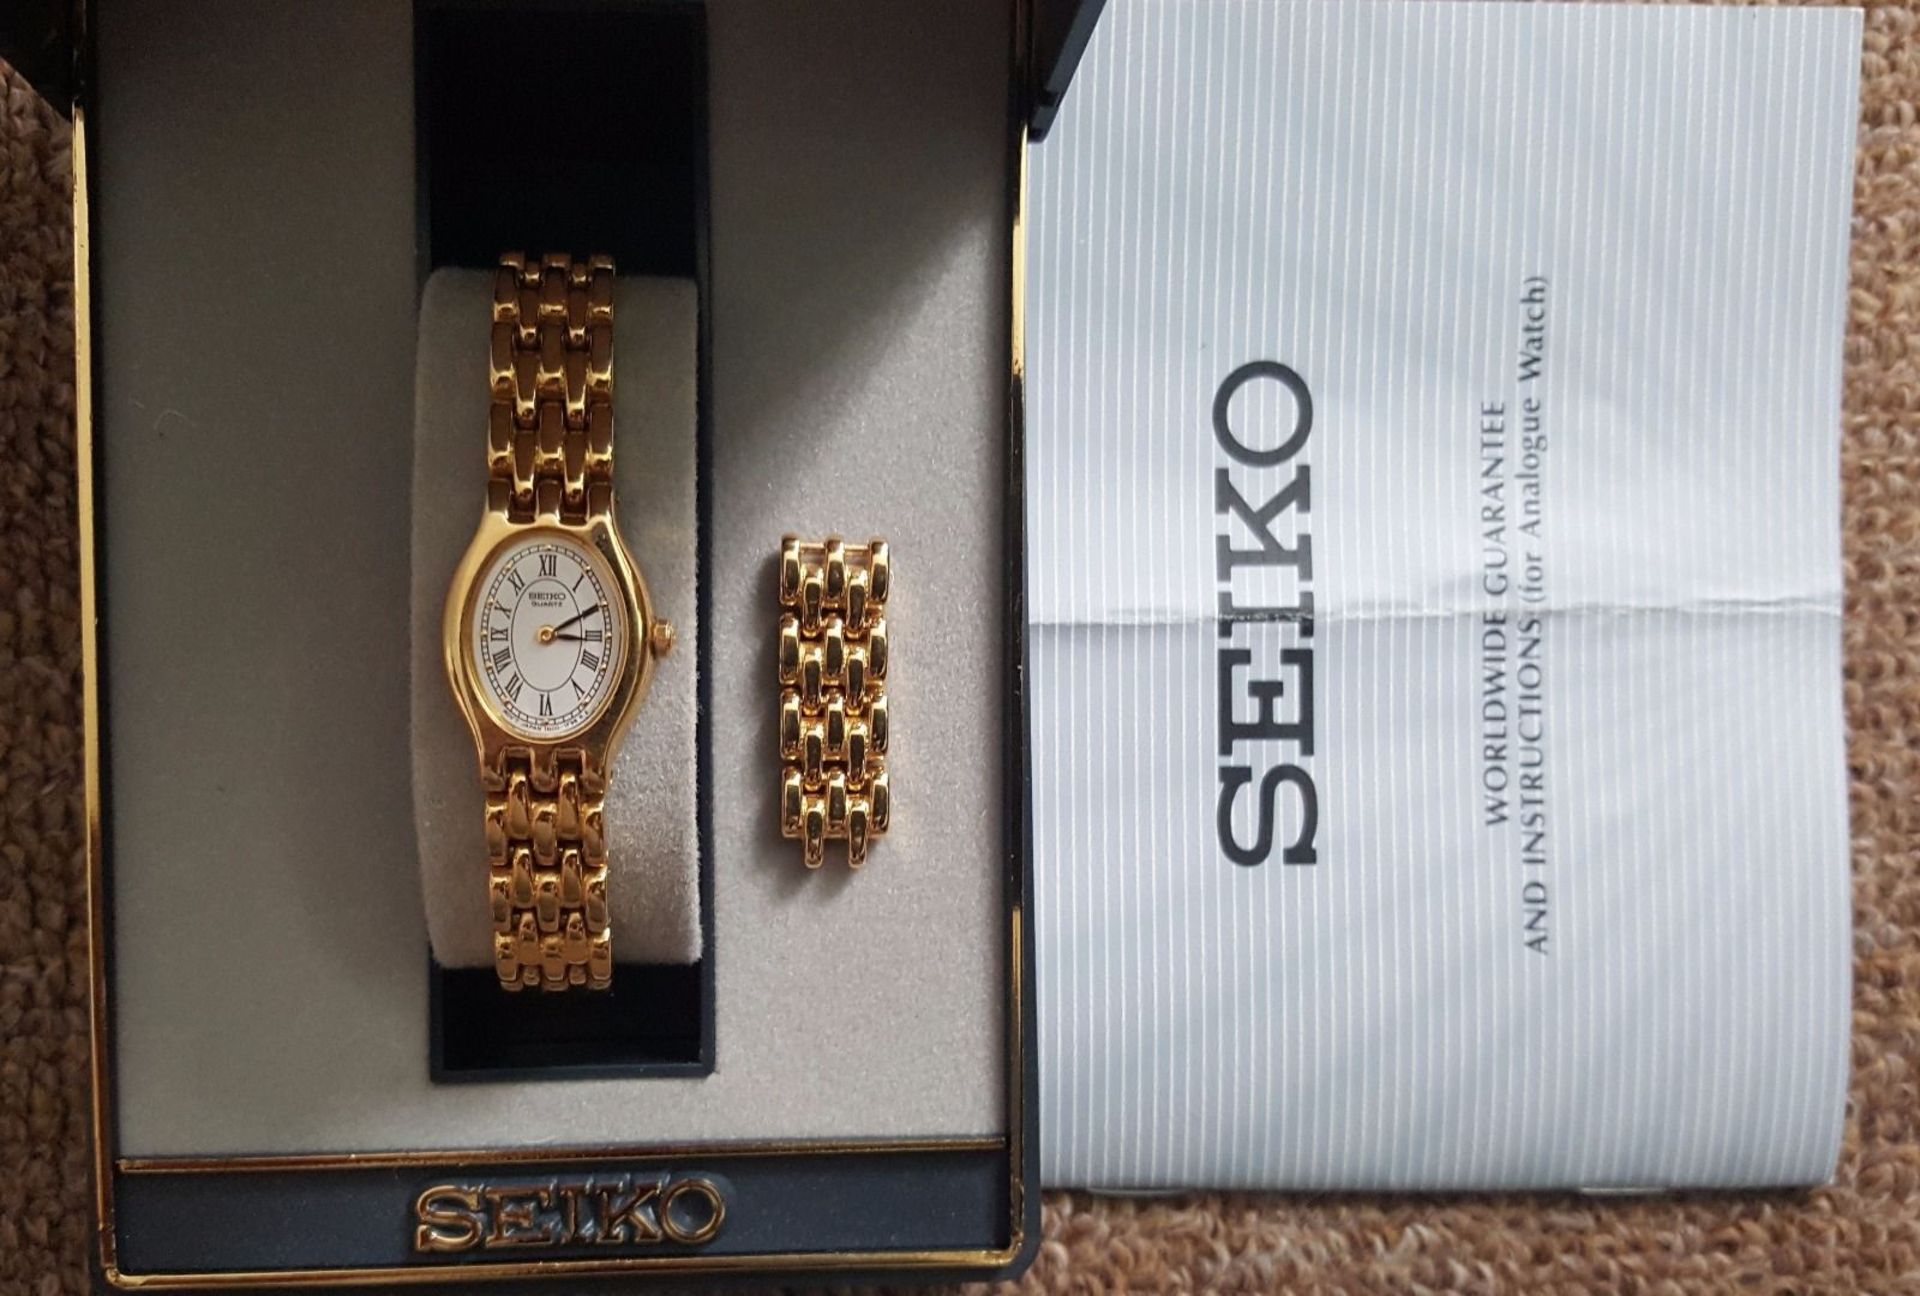 SEIKO WATCH   GOOD CONDITION, MINOR MARKS   1st CLASS RECORDED DELIVERY £9.99 - Image 2 of 5